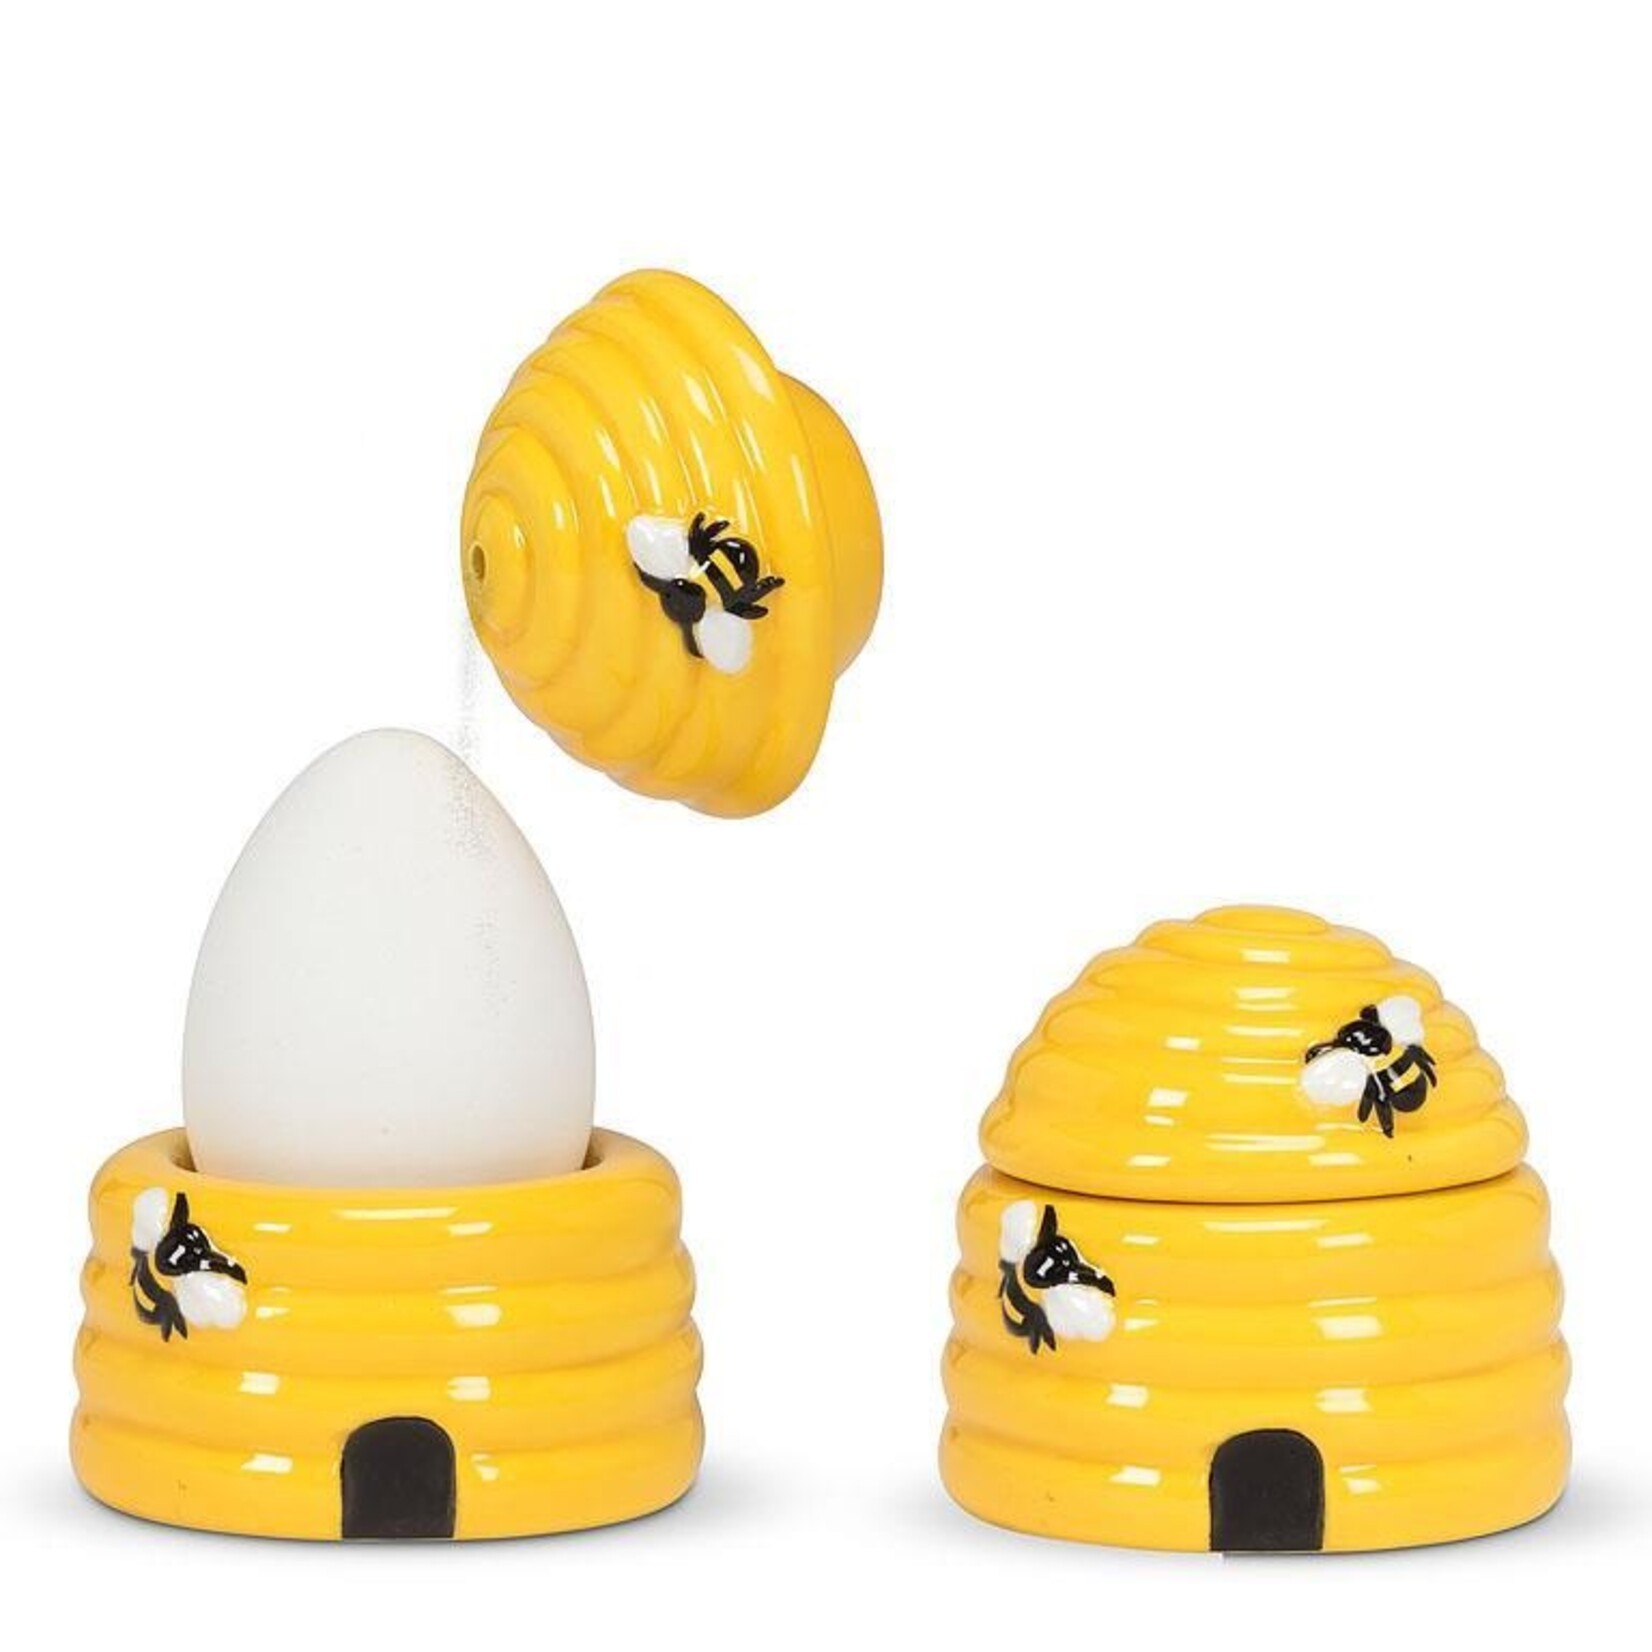 Beehive Egg Cup with Salt Shaker